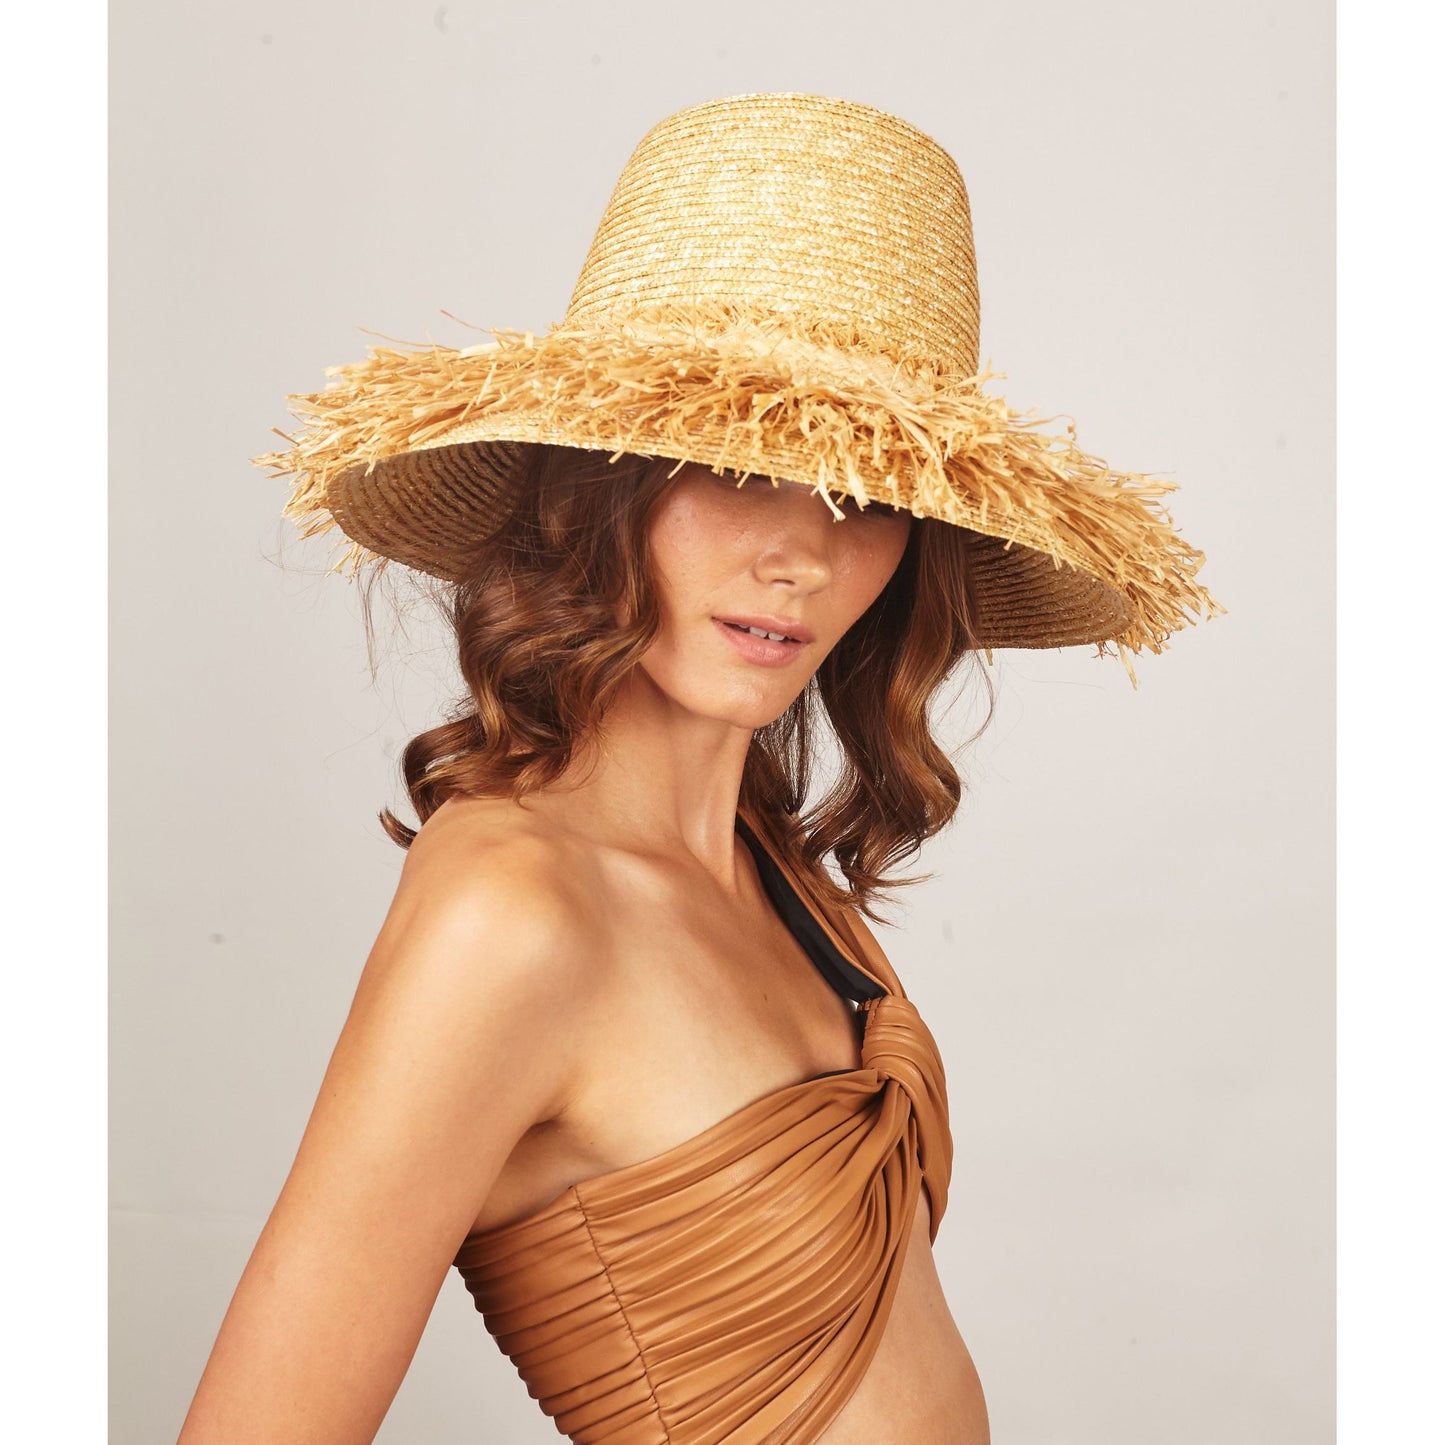 A woman wearing Lola Hats' wide-brimmed wheat straw hat and a brown swimsuit poses against a neutral background.